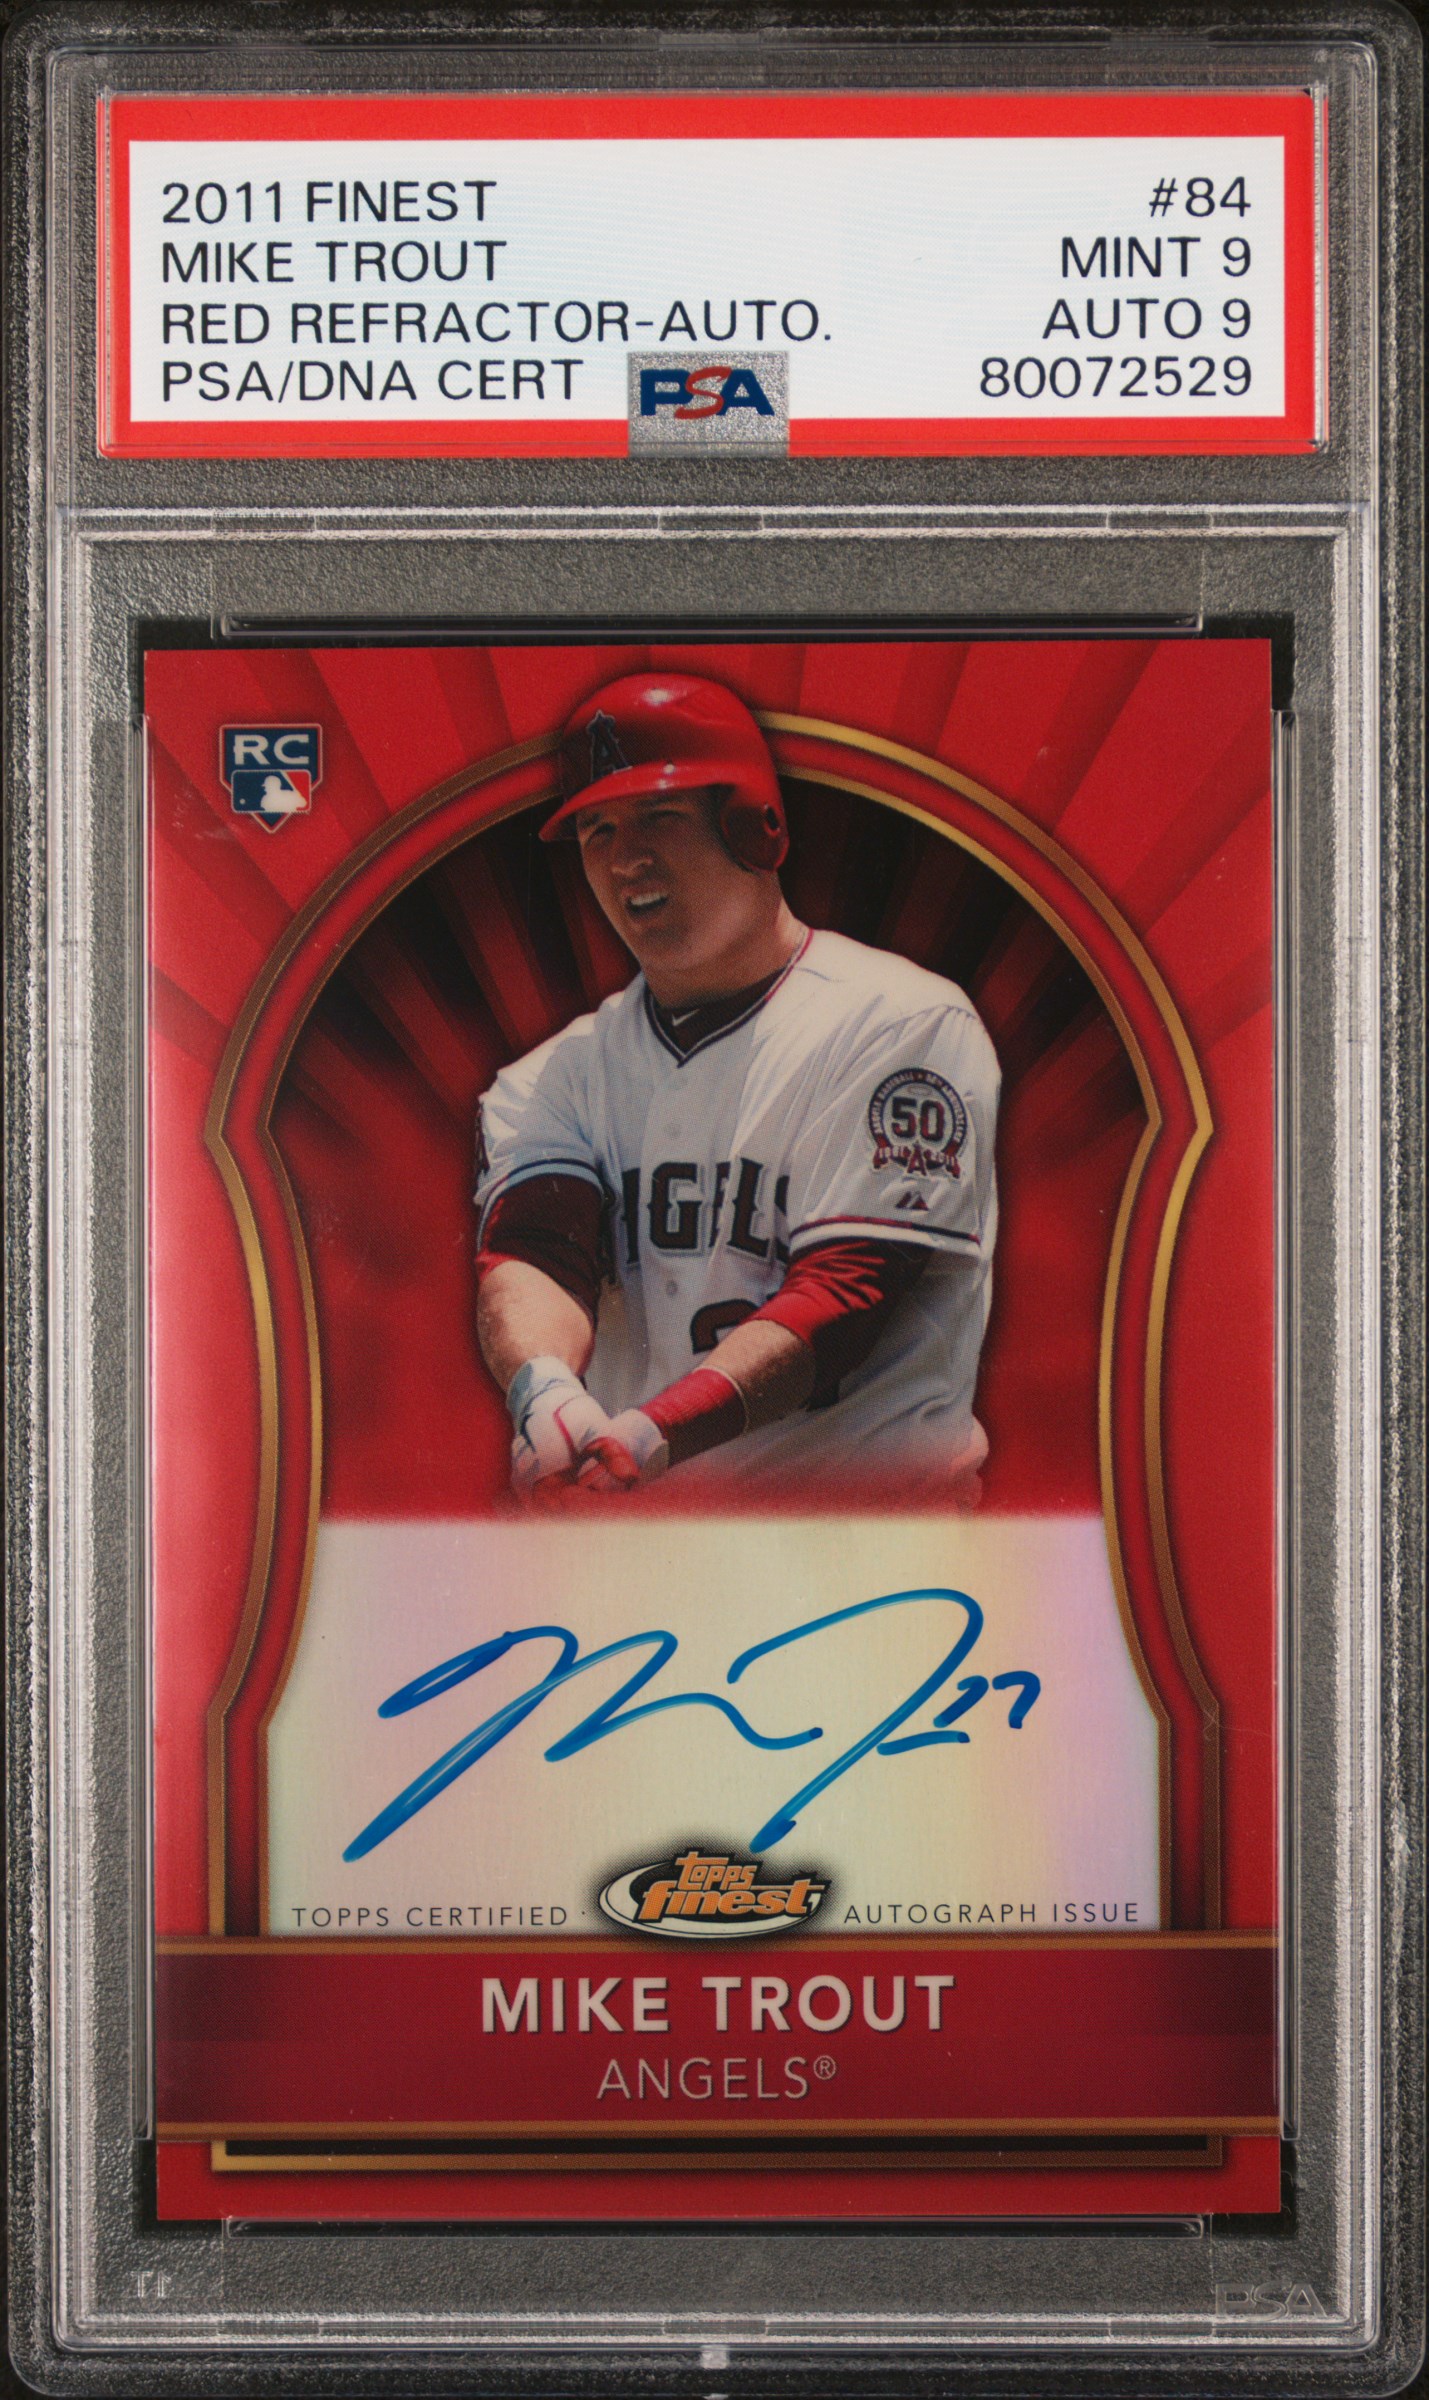 2011 Topps Finest Autographs Red Refractor #84 Mike Trout Rookie Card Signed Rookie Card (#09/25) - PSA MINT 9, PSA/DNA MINT 9 - Pop 2